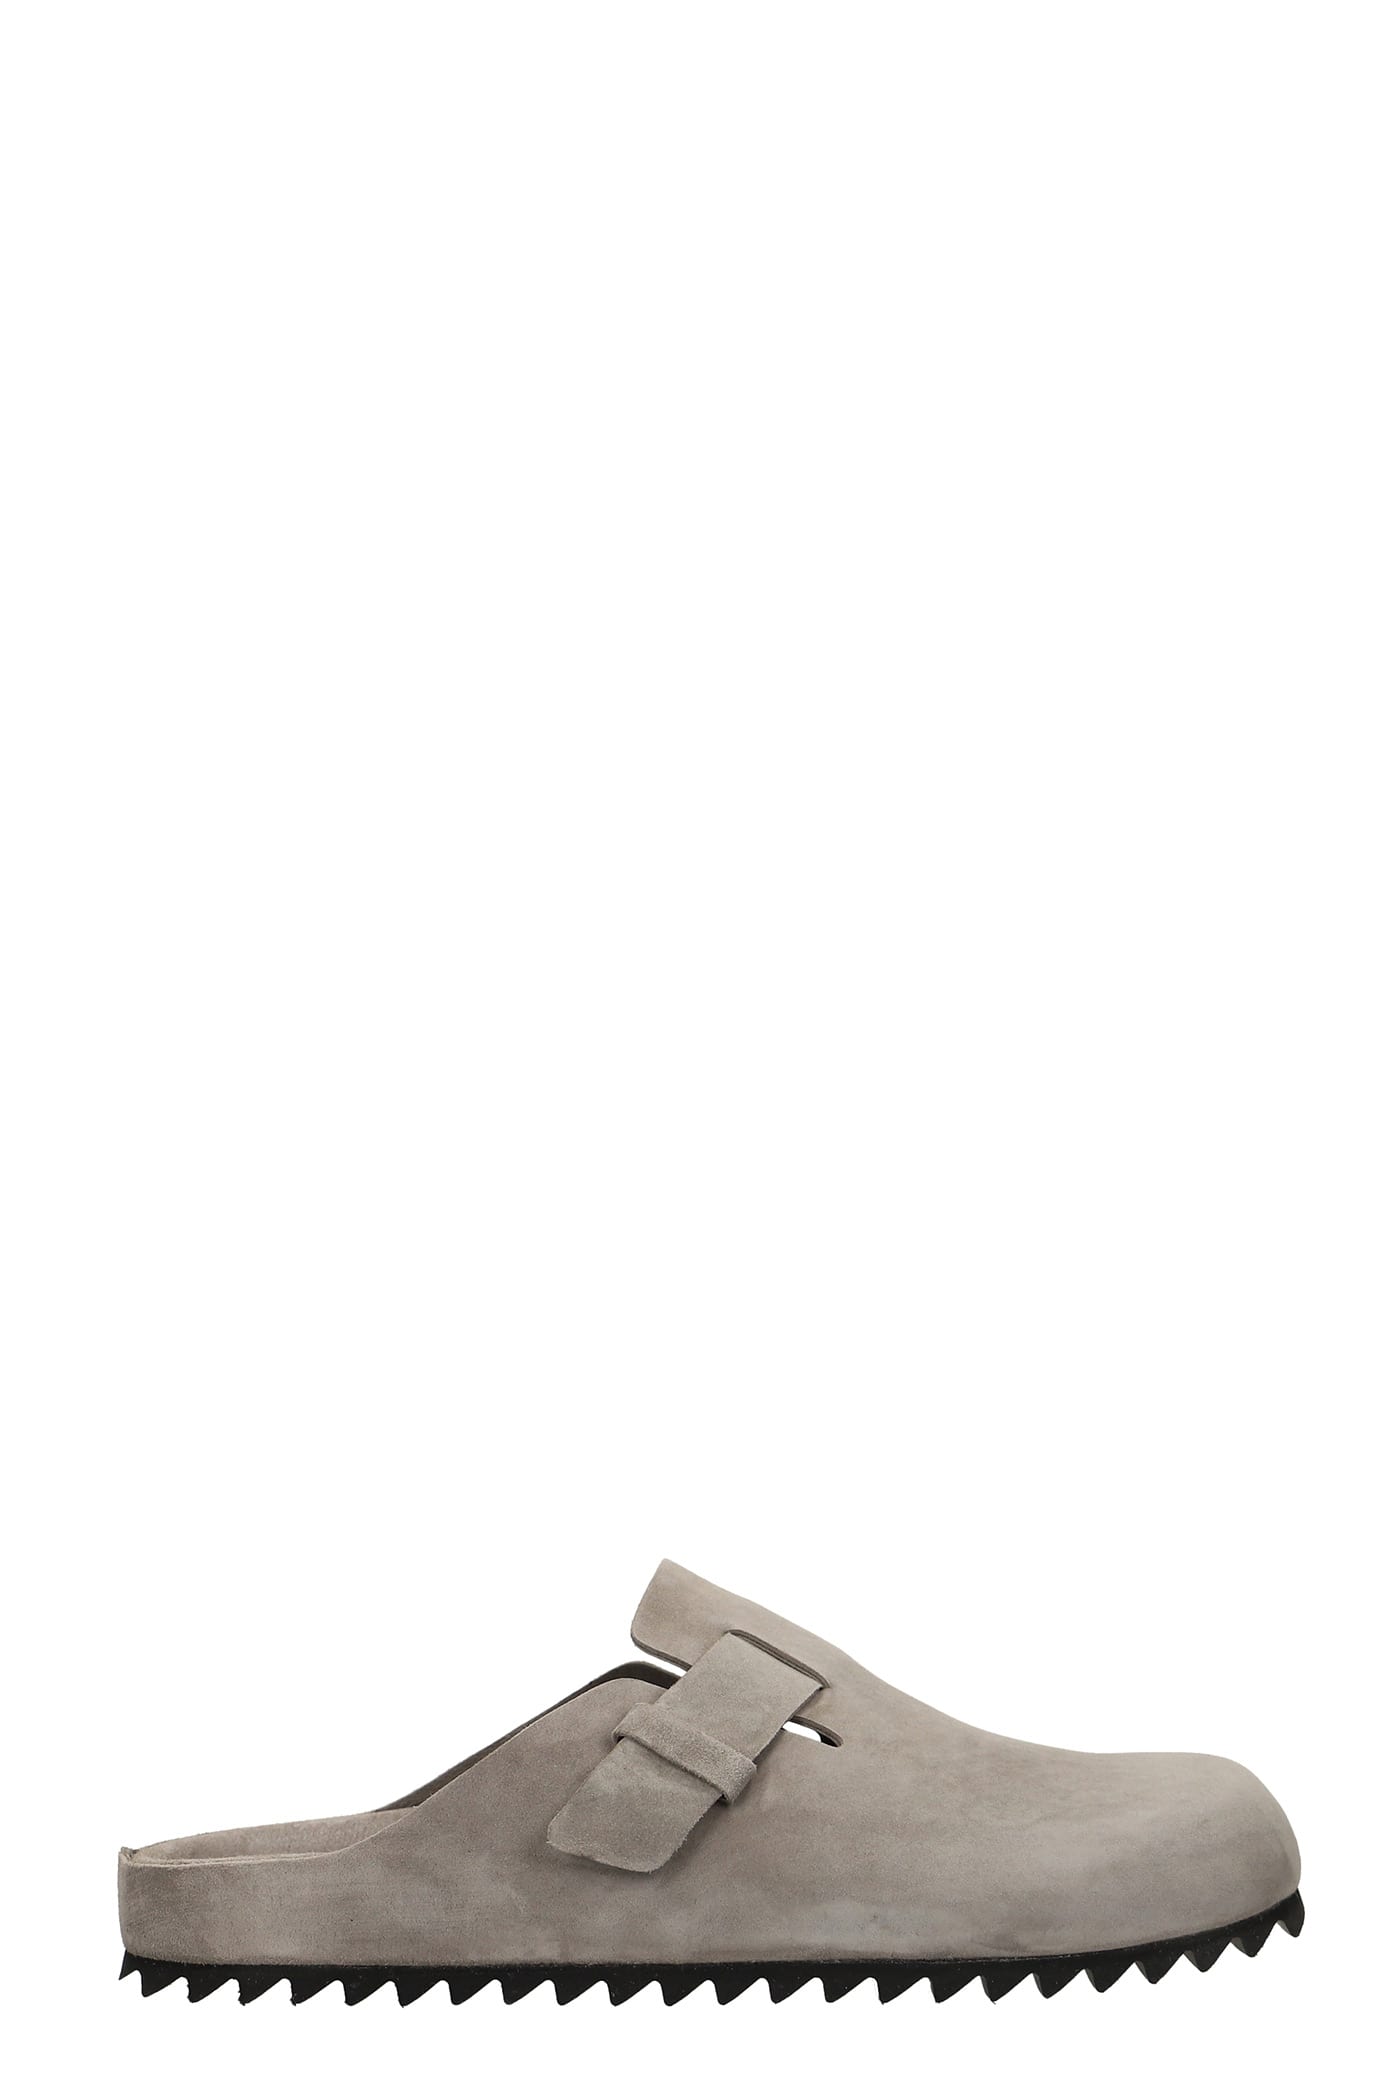 Officine Creative Flats In Grey Leather